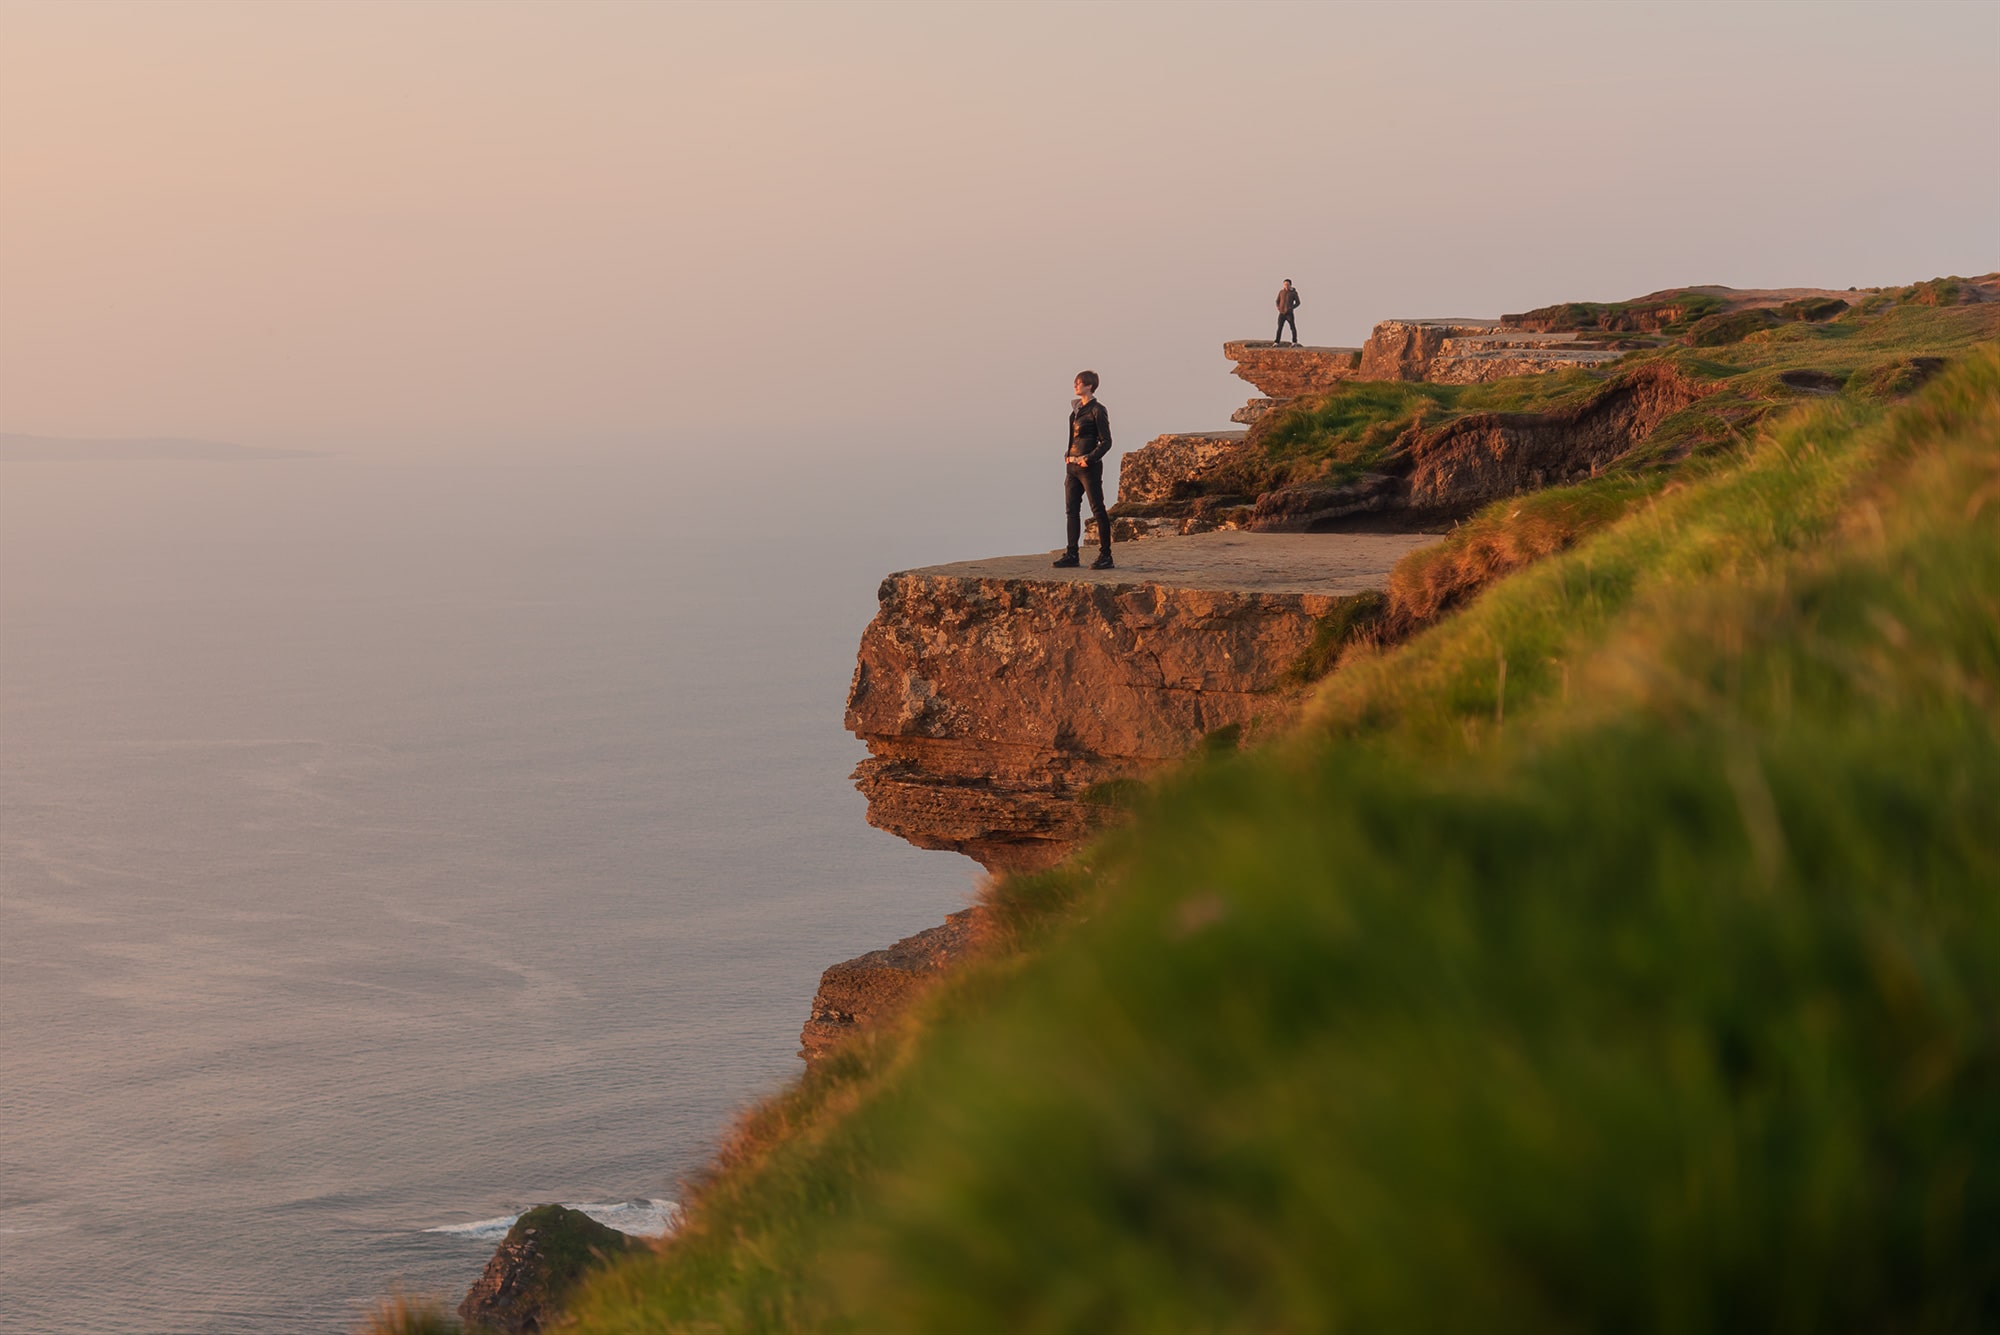 This stunning landscape photography showcases the iconic cliffs at sunset, bathed in the warm hues of the evening sky. Amidst this awe-inspiring scenery, two figures stand on the cliffs, providing a sense of scale and perspective to the vastness of the landscape. Join Jennifer Esseiva on this visual journey as she captures the magic of one of Ireland's most renowned landmarks, inviting viewers to immerse themselves in the timeless beauty of the Cliffs of Moher.